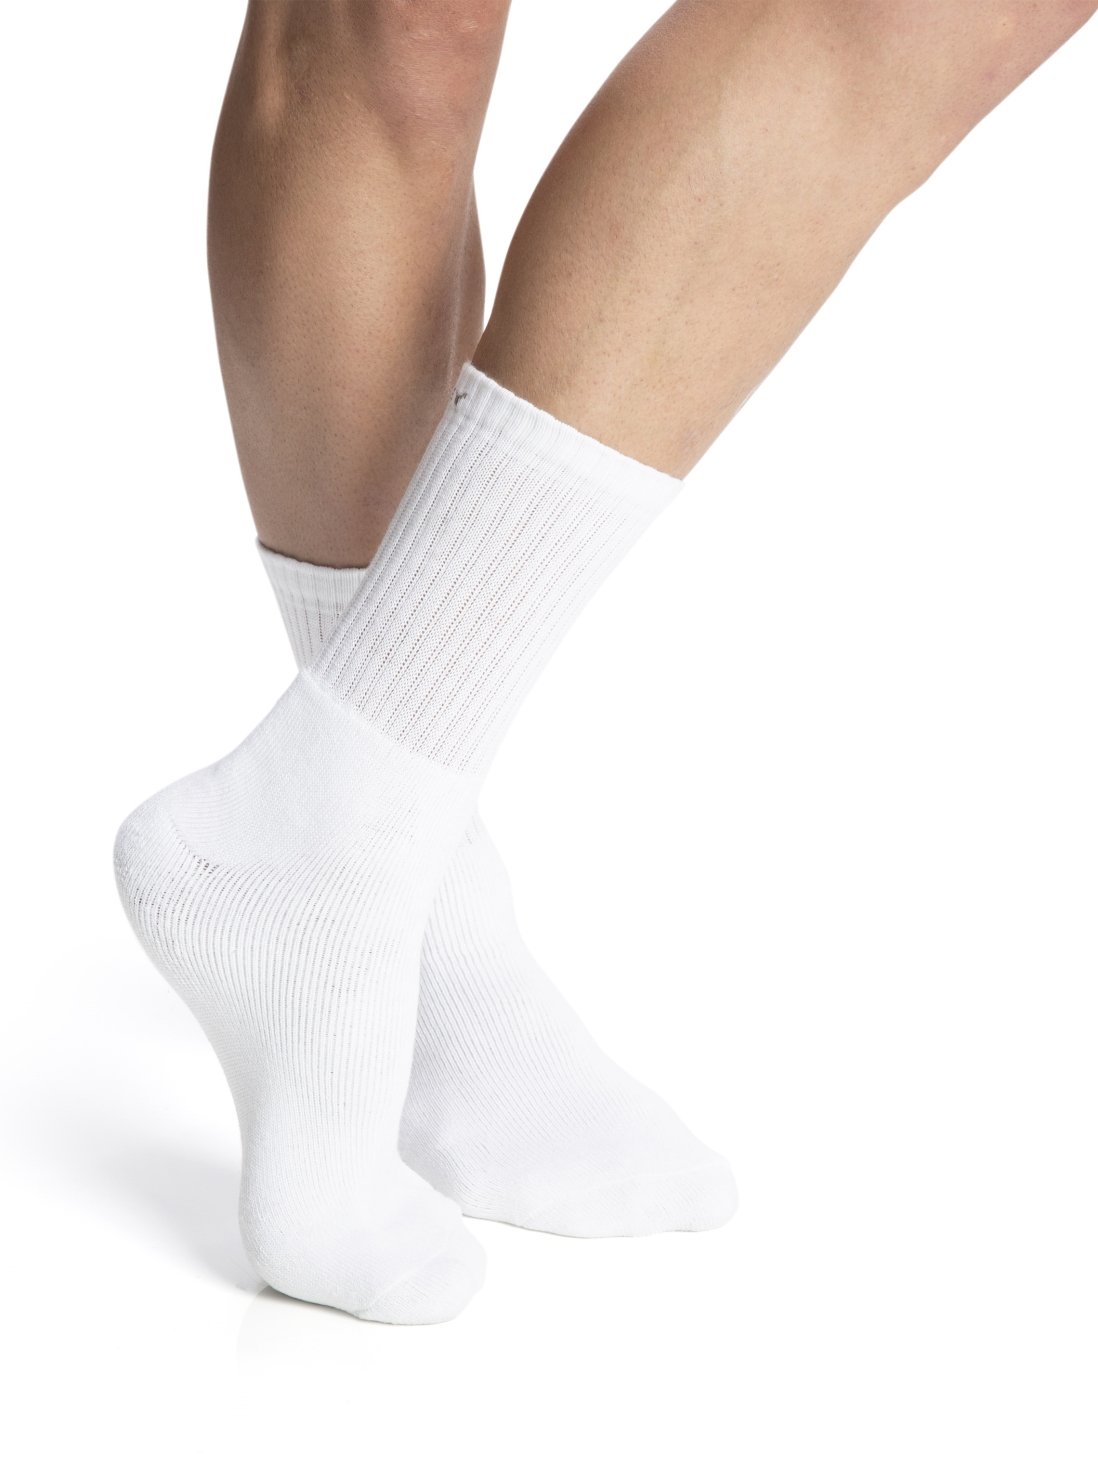 What’s the difference between sports socks and business socks？